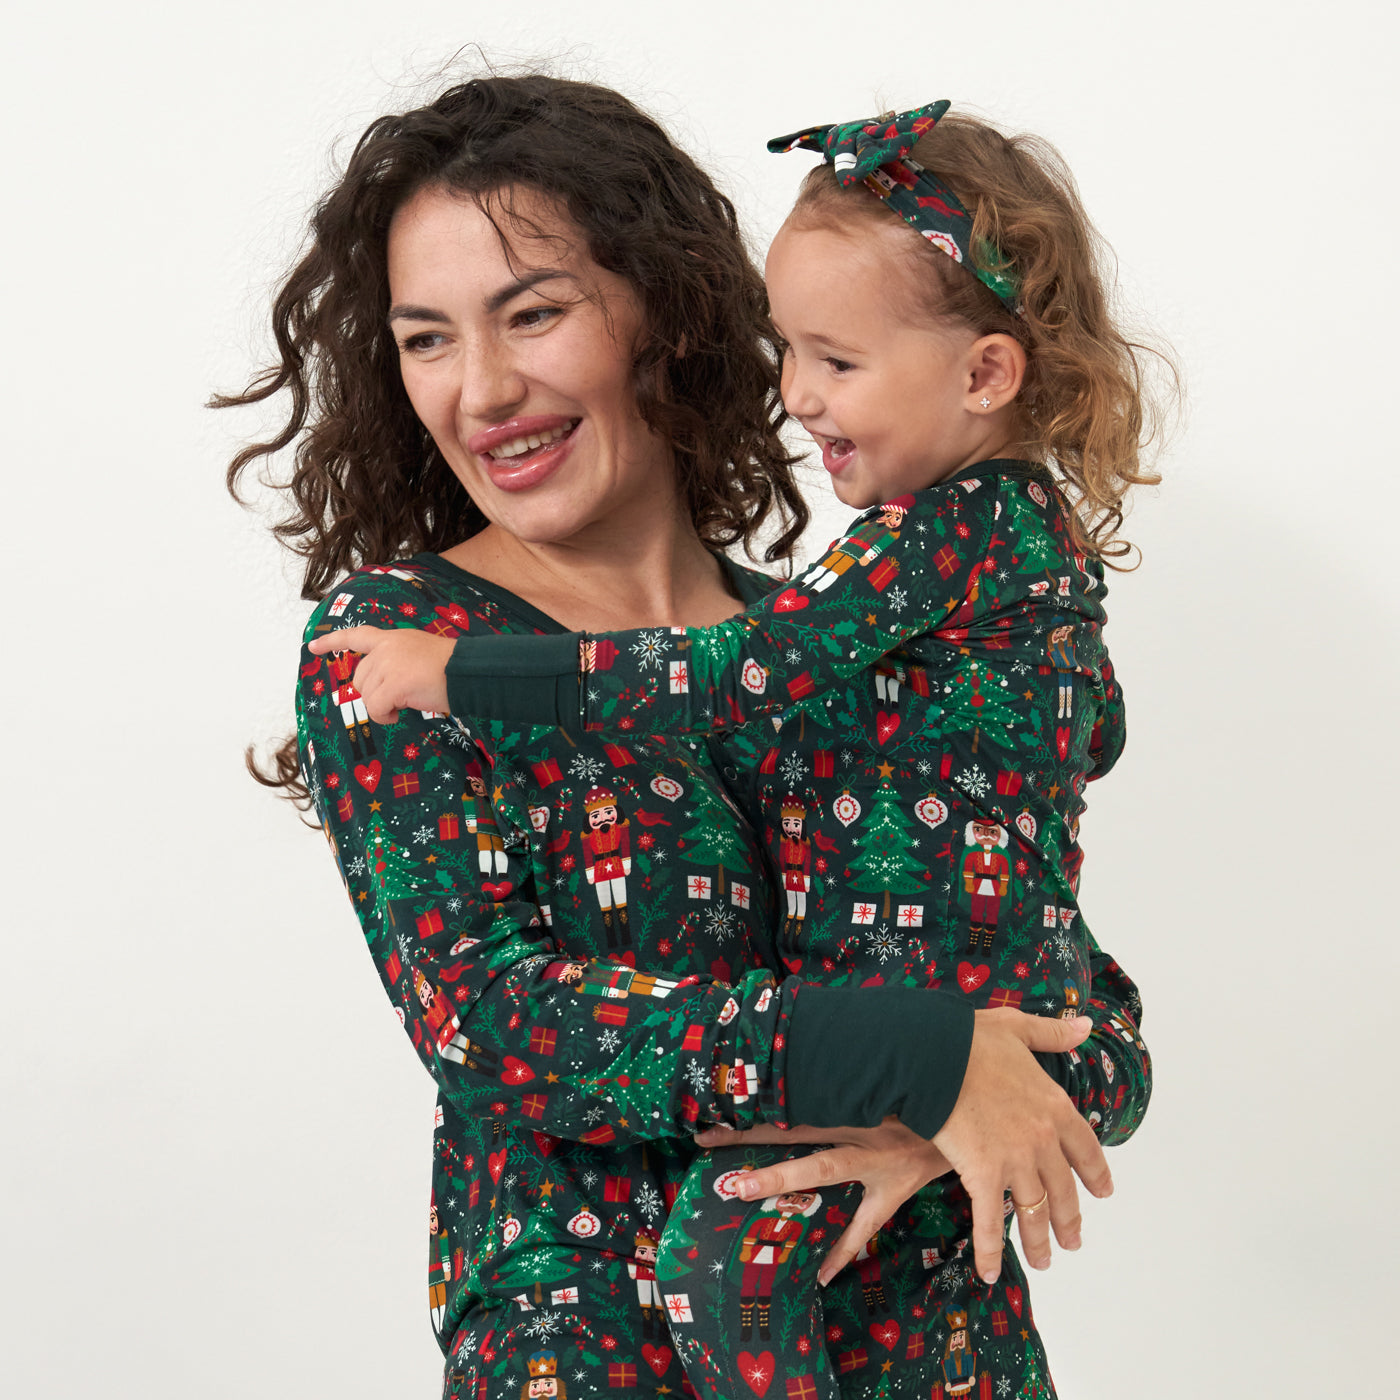 Woman holding her daughter on her hip. Mom is wearing a women's Night at the Nutcracker women's pajama top and her daughter is wearing a Night at the Nutcracker zippy paired with a matching luxe bow headband